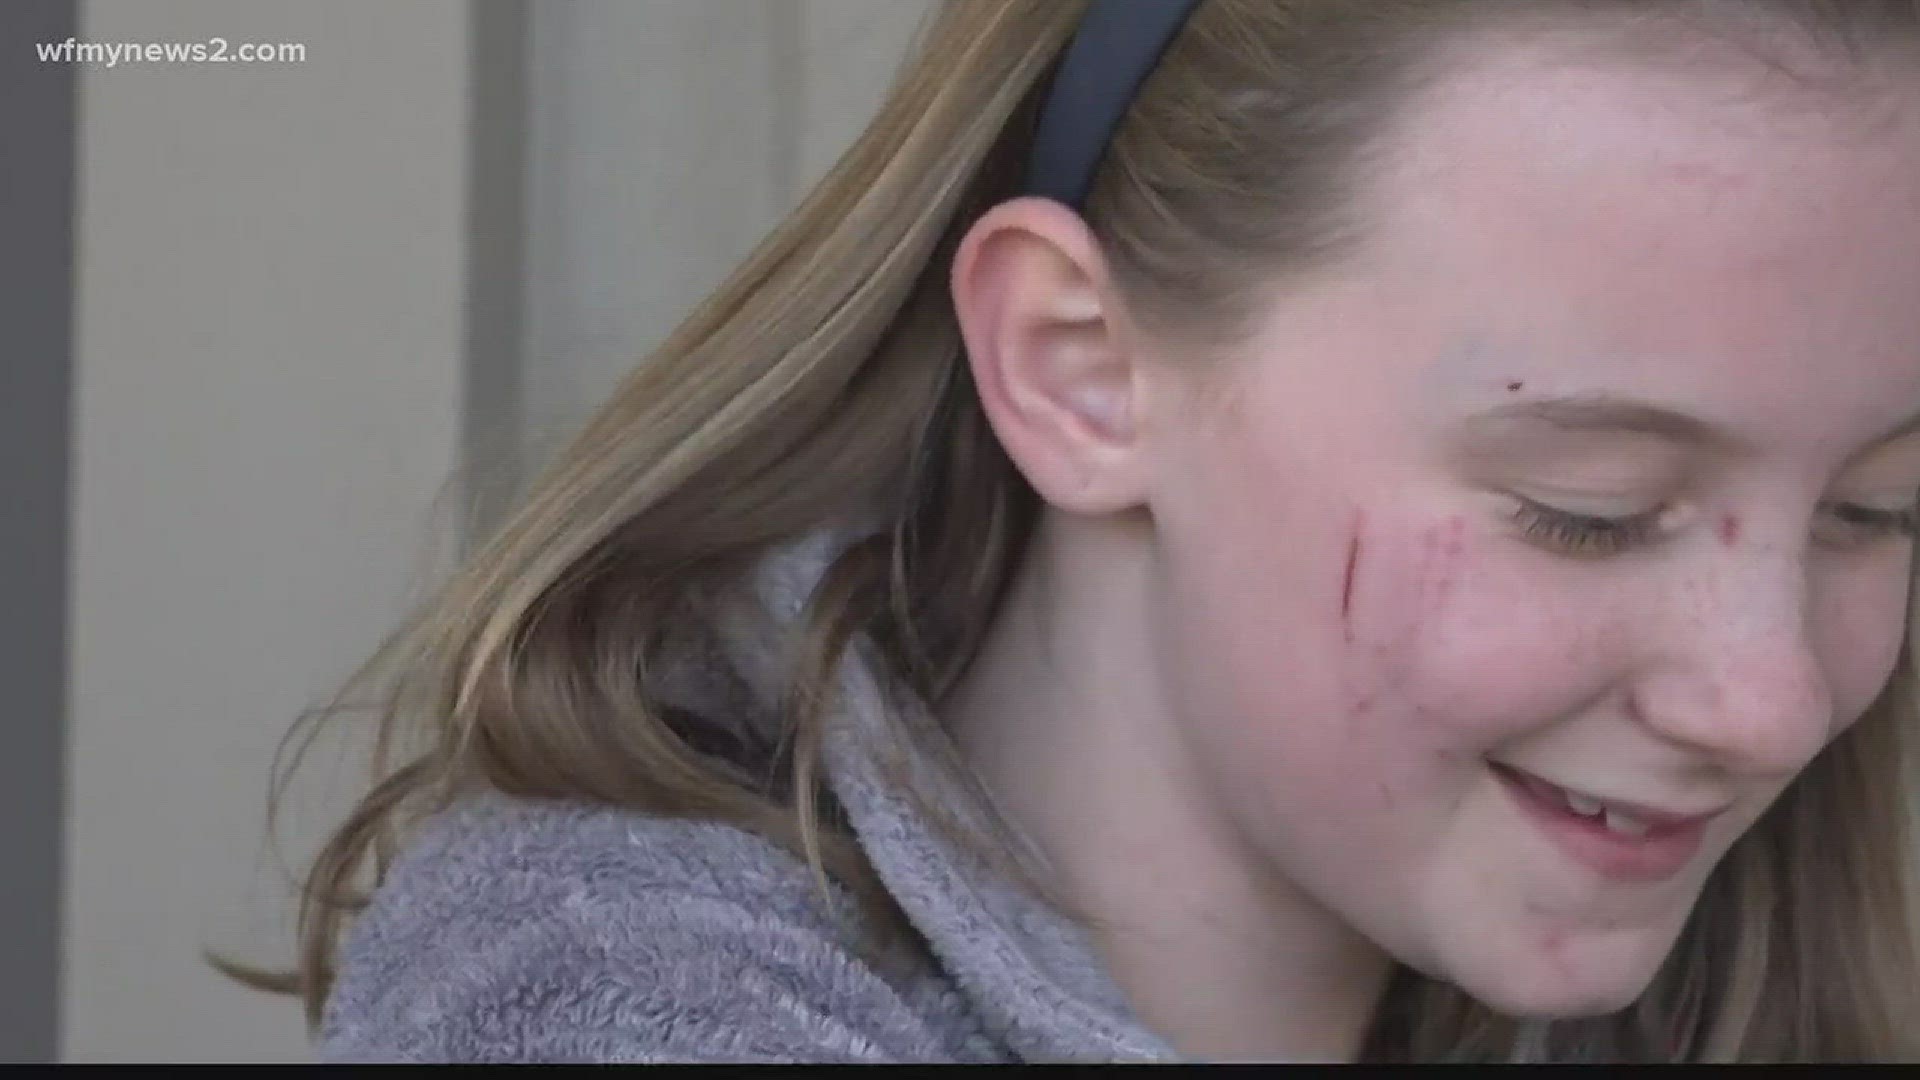 A 9-year-old is recovering from her injuries after being attacked by a coyote. Madilyn Fowler says she was standing outside her home Thursday evening, when a coyote rounded the corner and charged at her, showing its teeth, then biting at her dress as she raced for the door of her house.